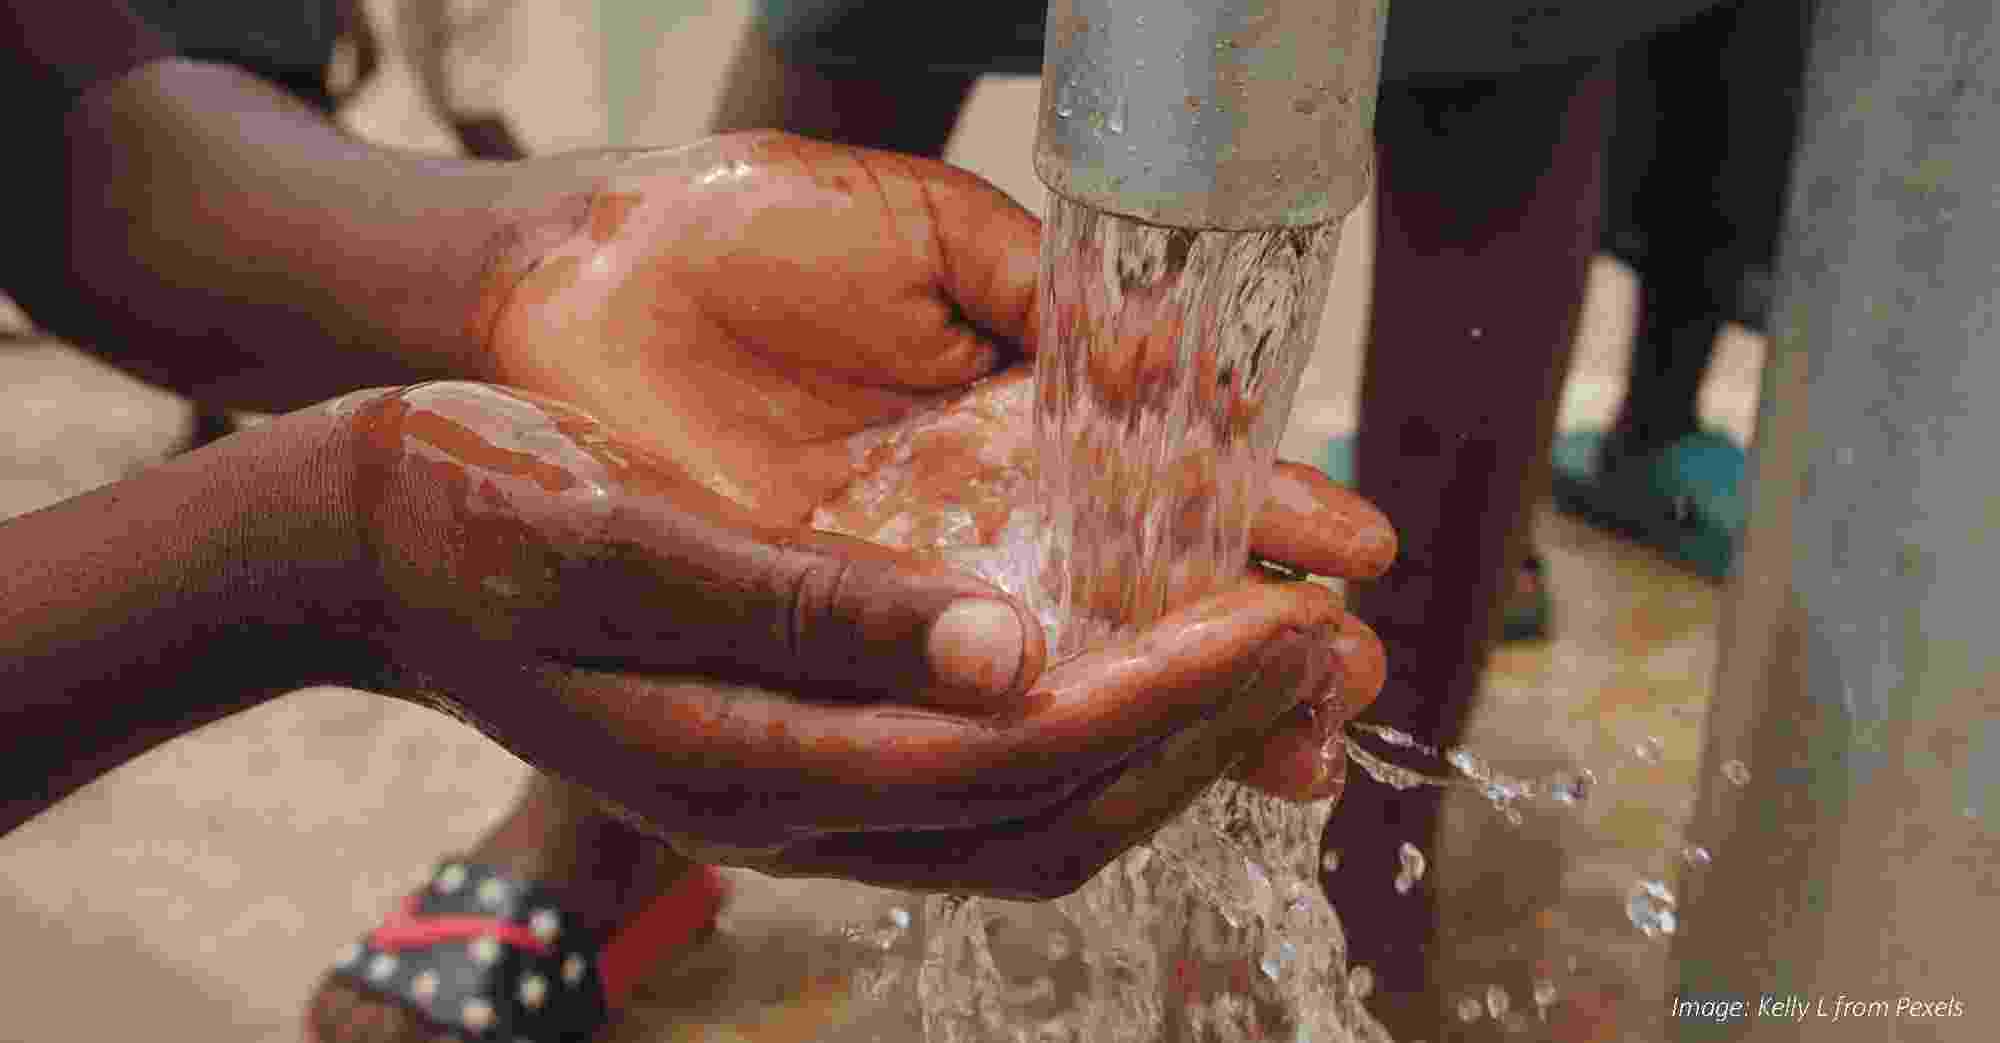 Image shows a child holding their hands under clean water flowing out of a pipe